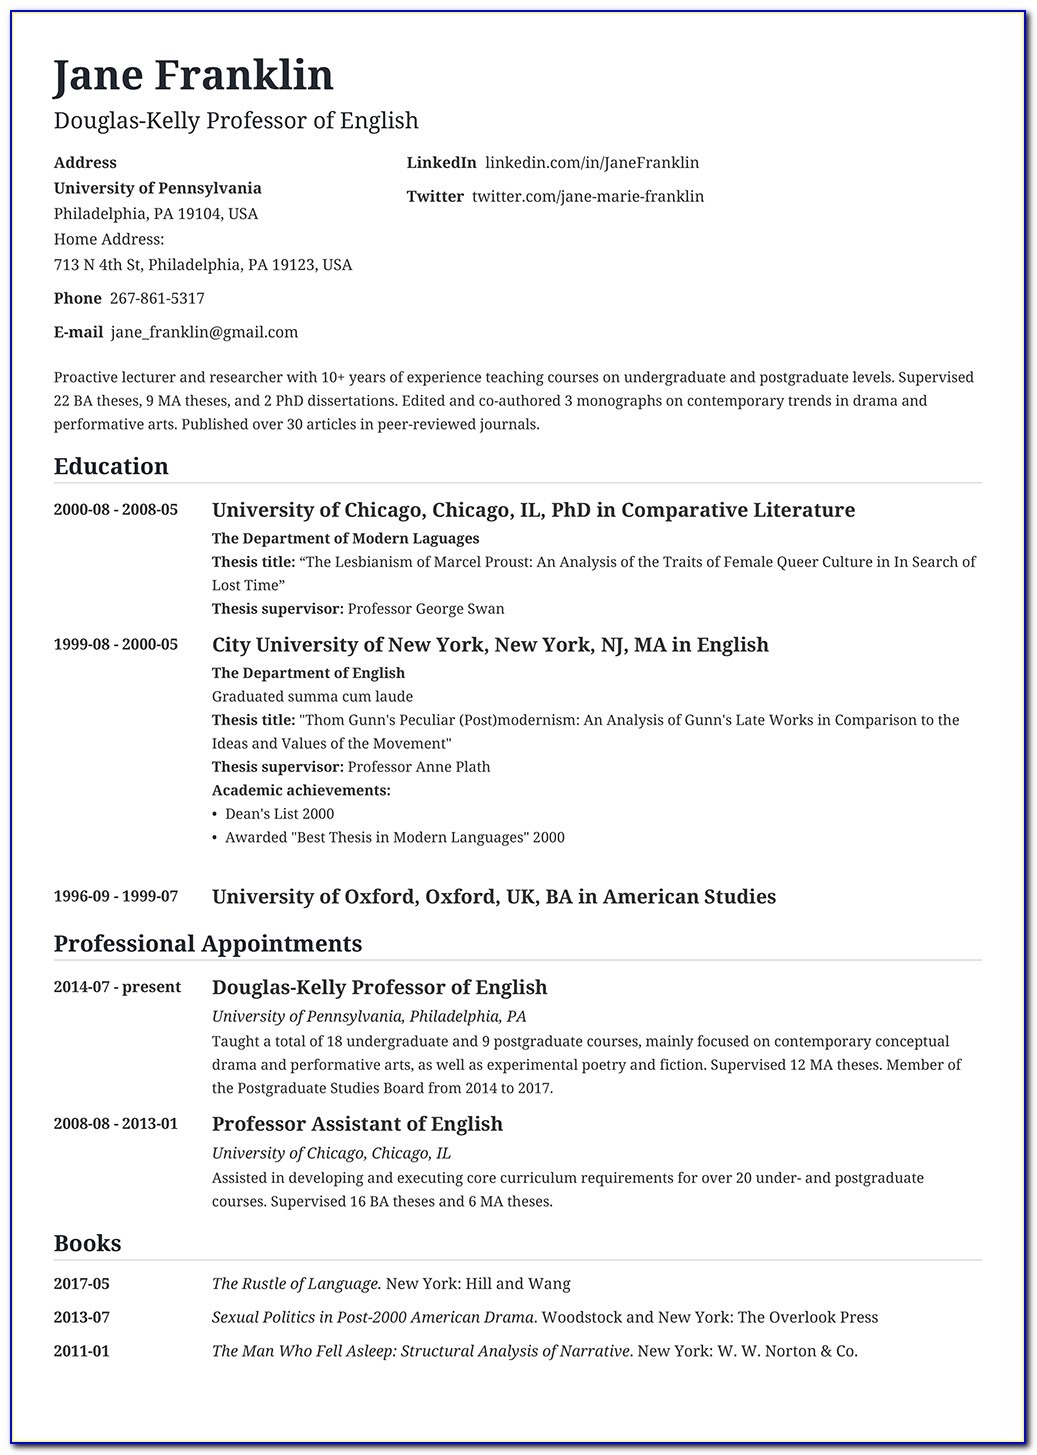 Resume Format For College Students